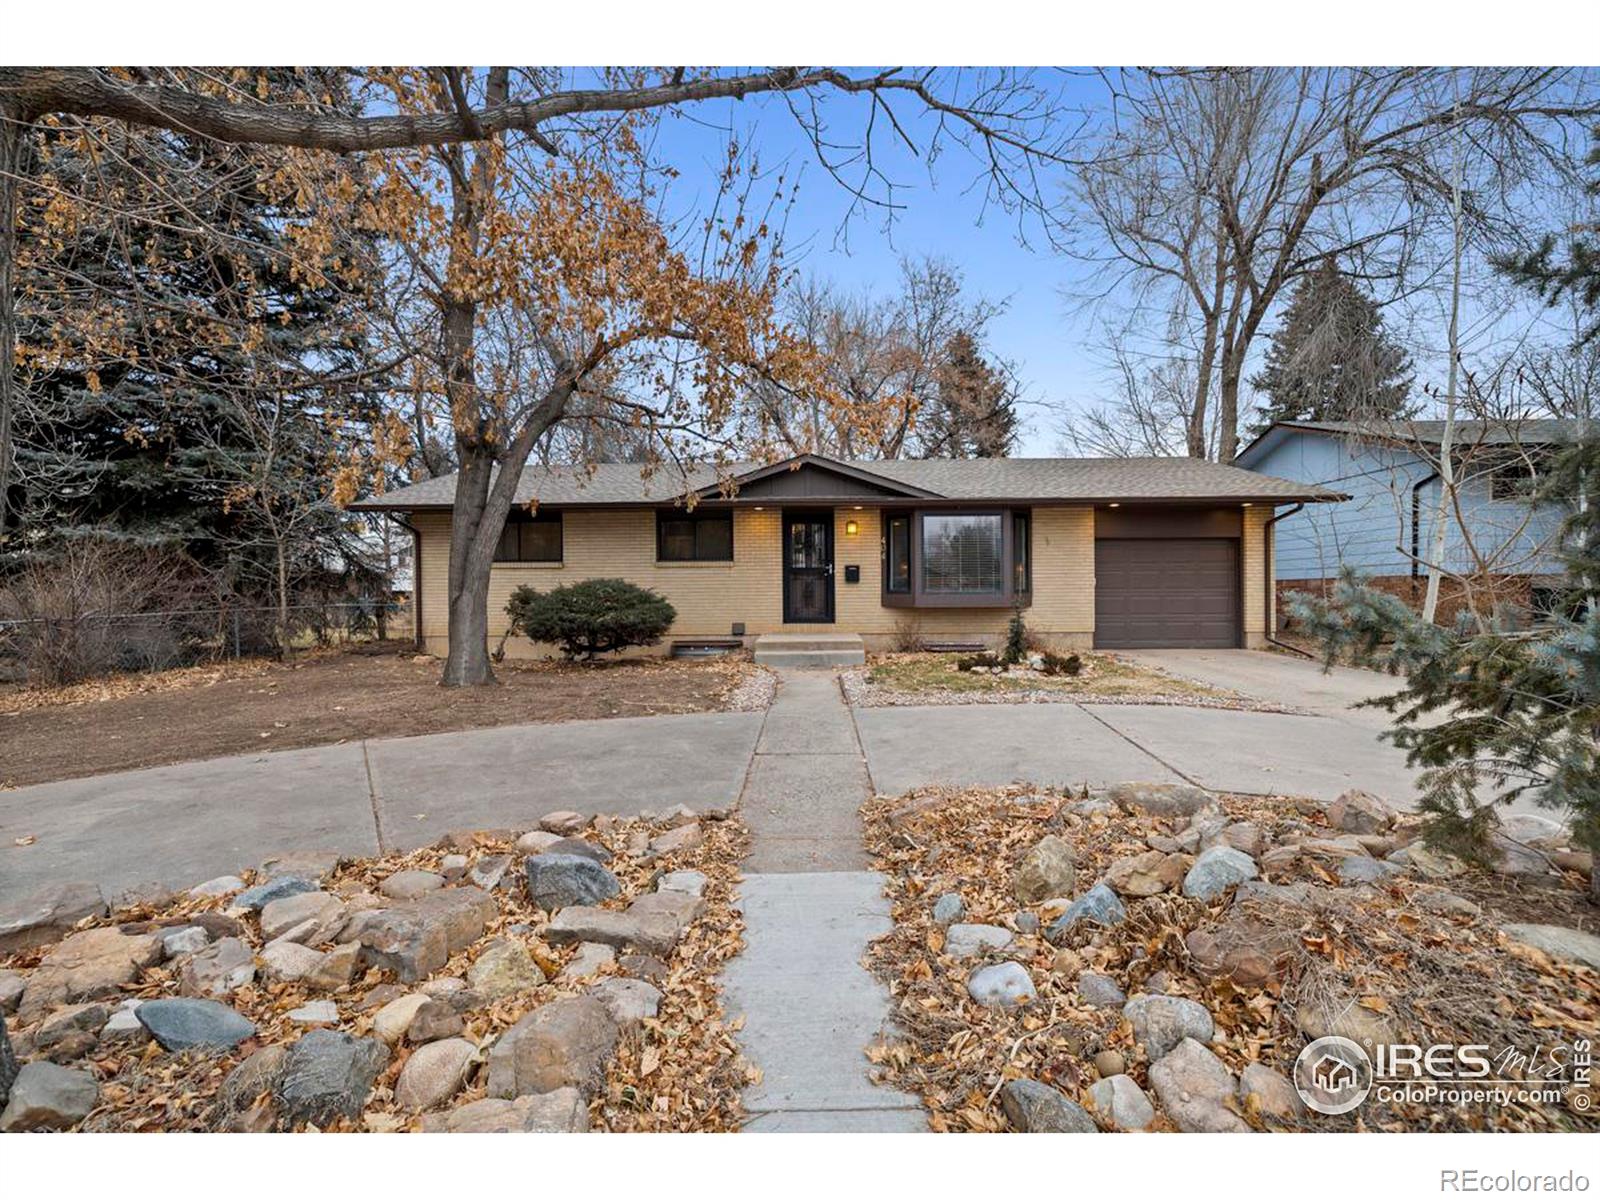 404 E Drake Road, fort collins MLS: 4567891003457 Beds: 5 Baths: 2 Price: $535,000